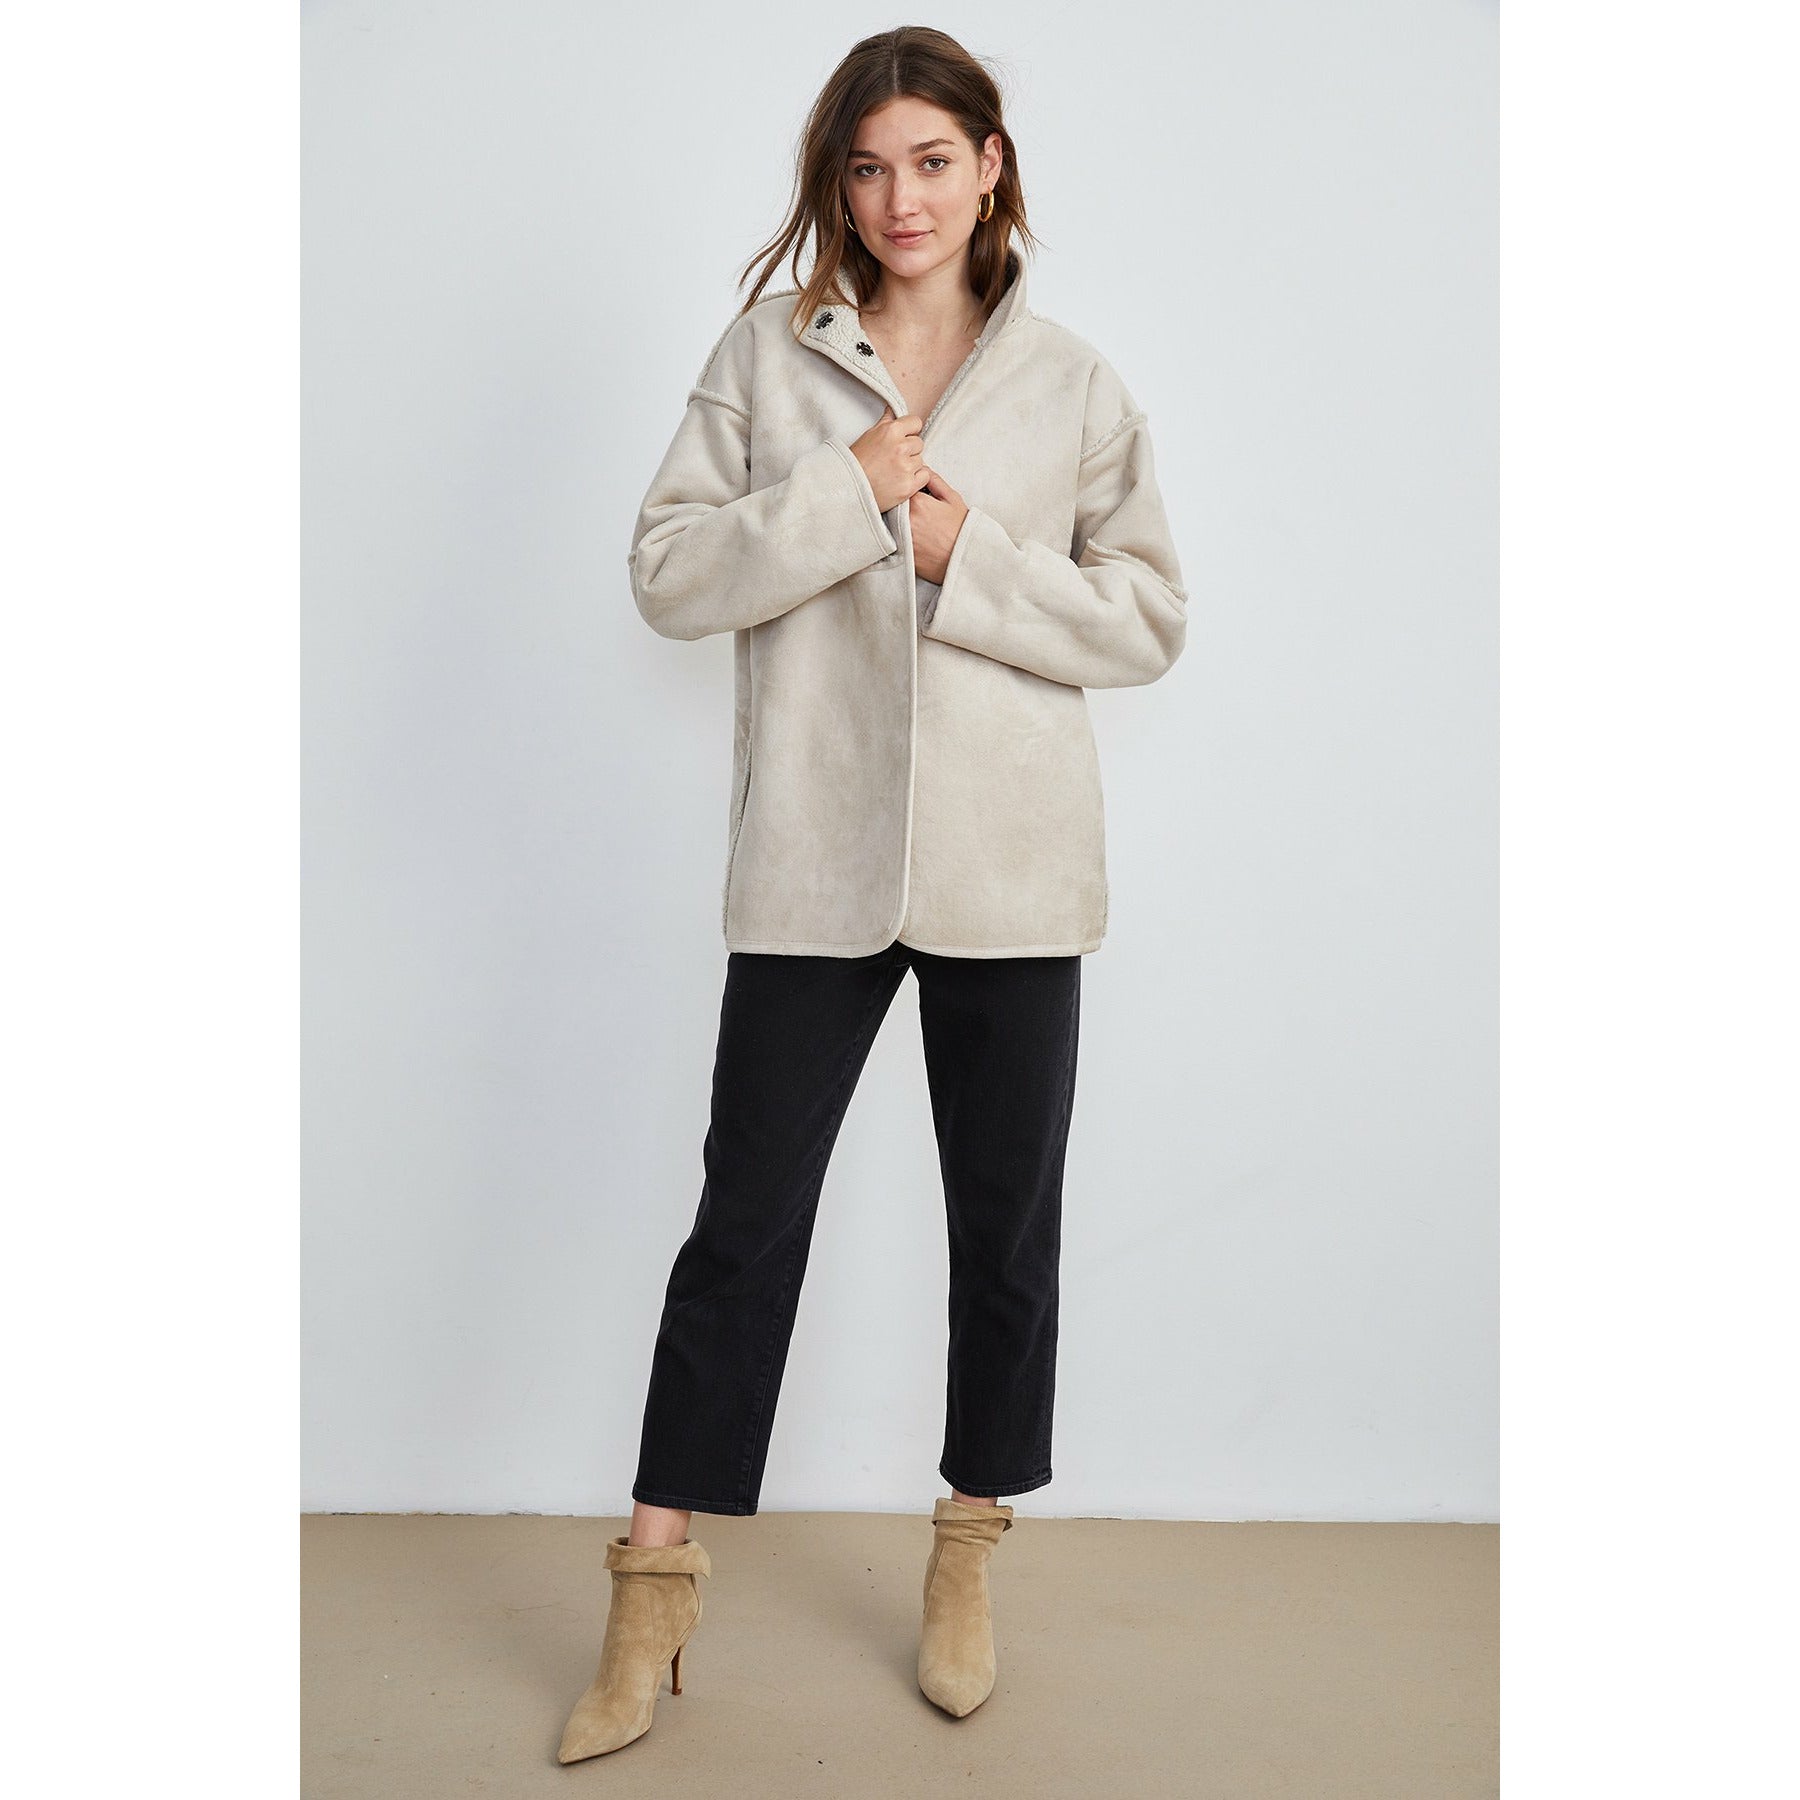 ALBANY LUX SHERPA REVERSIBLE JACKET